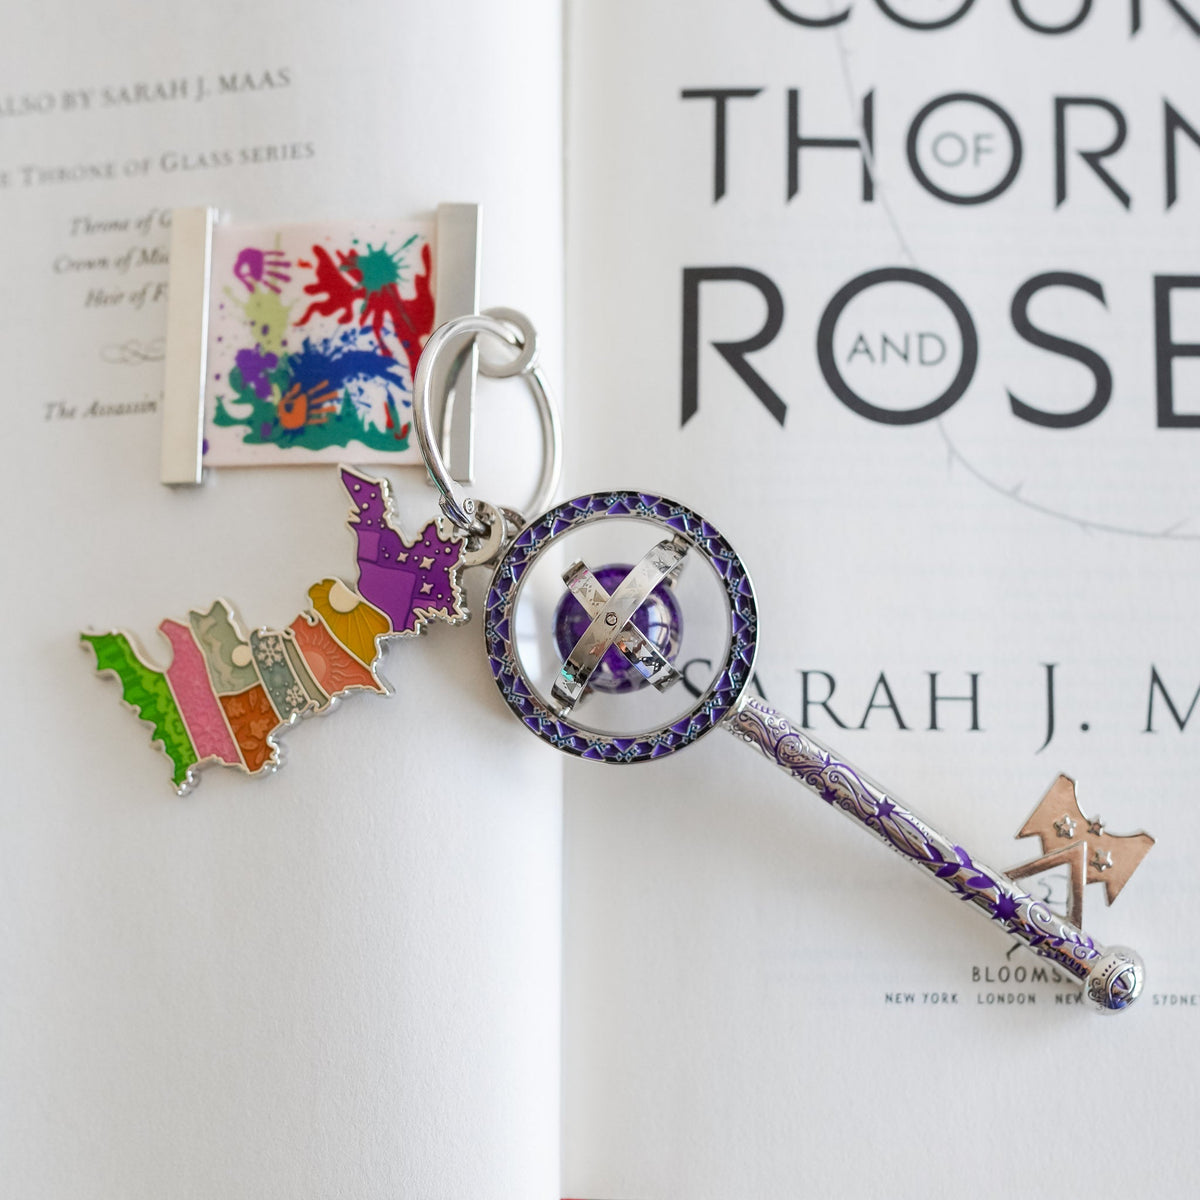 ACOTAR Collectible Key with a glitter bubble, tattoos on the key shaft, a Prythian Courts Charm, and a Canvas Charm